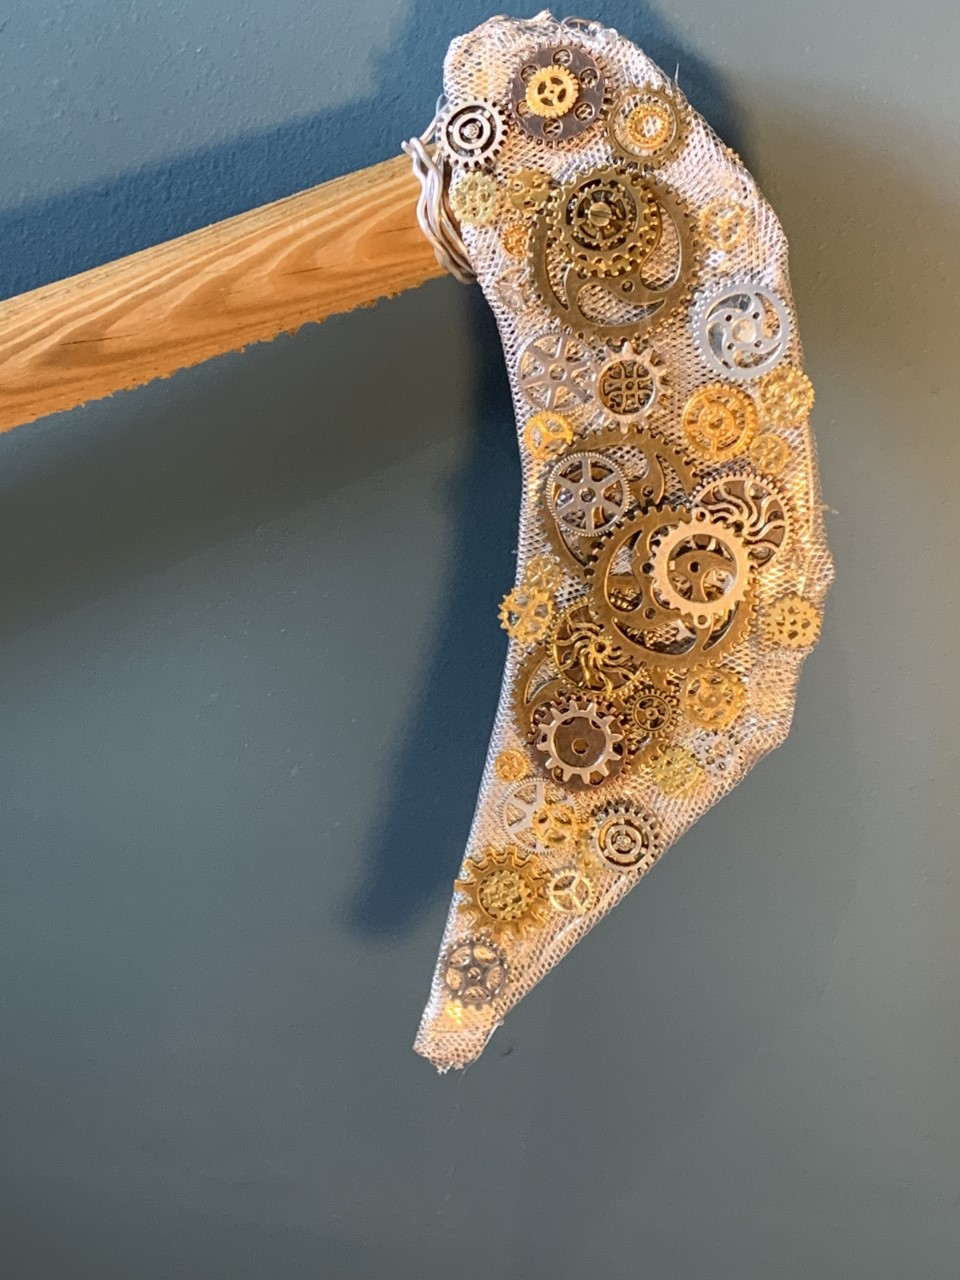 Photo of a 'scythe' with wooden handle and wire 'blade'. The blade is decorated with numerous silver and gold coloured cogs.